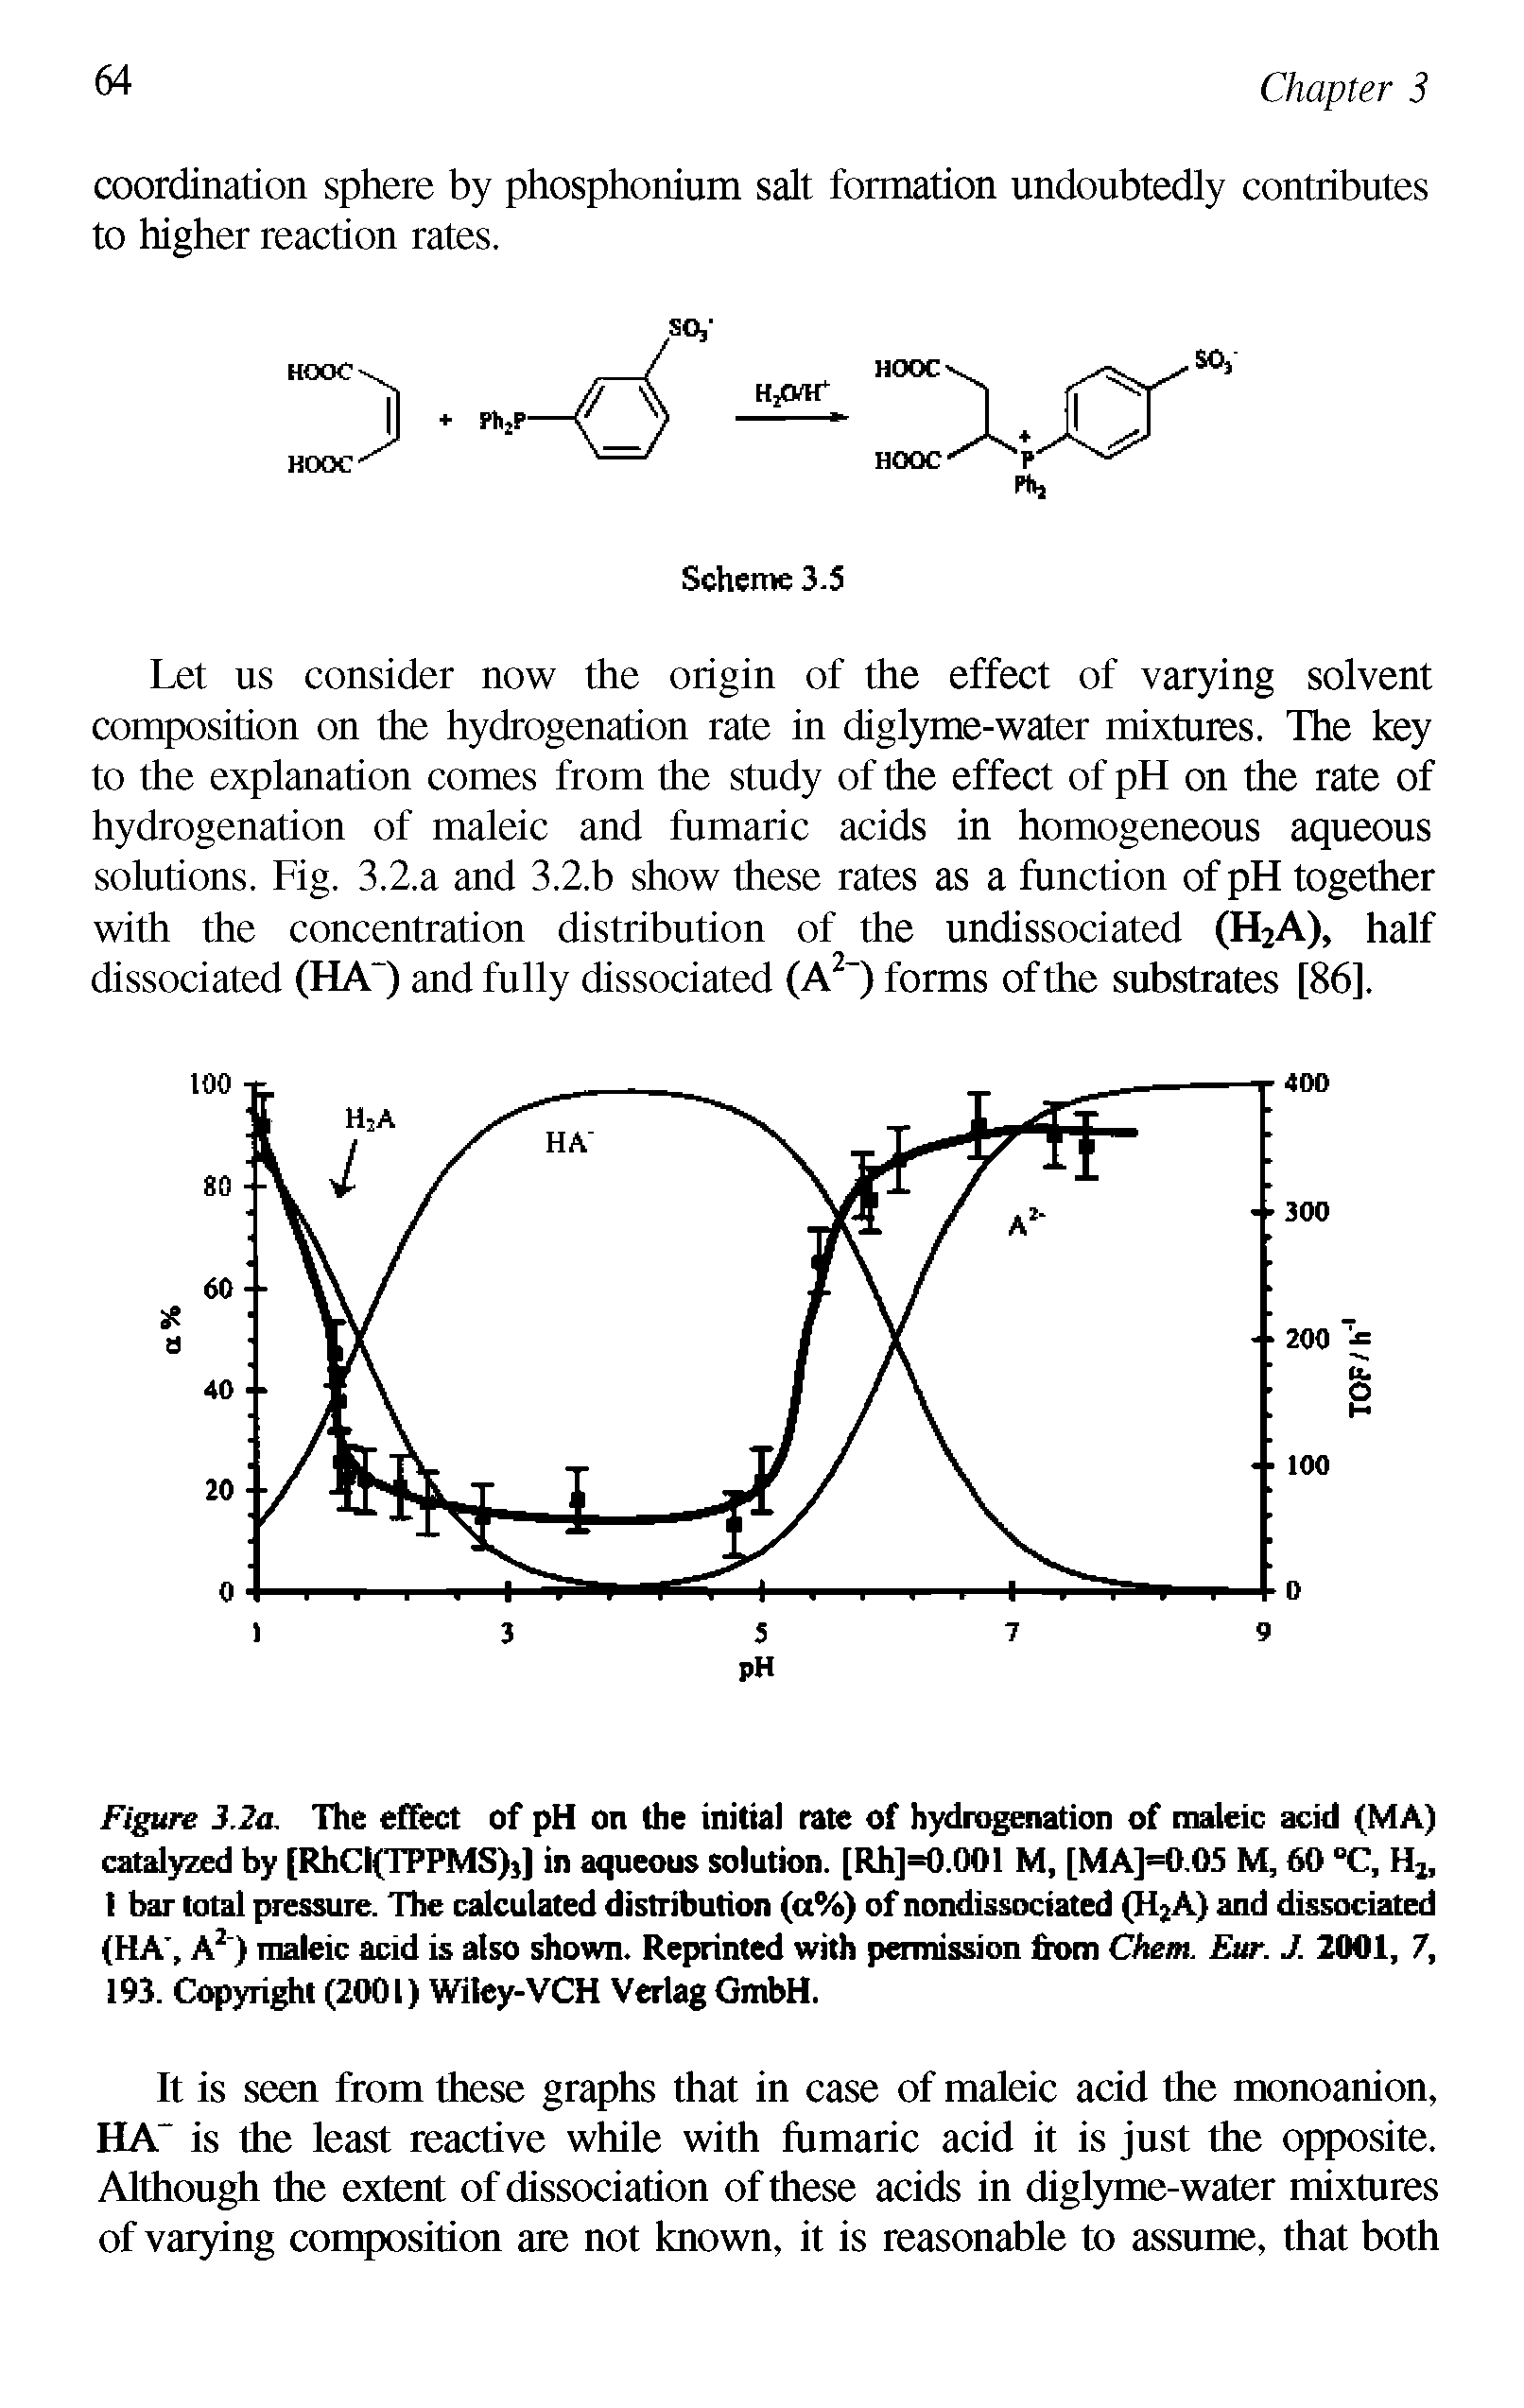 Figure 3.2a. The effect of pH on the initial rate of hydrogenation of maleic acid (MA) catalyzed by [RhCI(TPPMS)j] in aqueous solution. [Rh]=0.001 M, [MA]=0.05 M, 60 C, Hj, I bar total pressure. The calculated distribution (a%) of nondissociated (H2A) and dissociated (HA, A ) maleic acid is also shown. Reprinted with pennission from Ckem. Eur. J. 2001, 7, 193. Copyright (2001) Wiley-VCH Verlag GmbH.